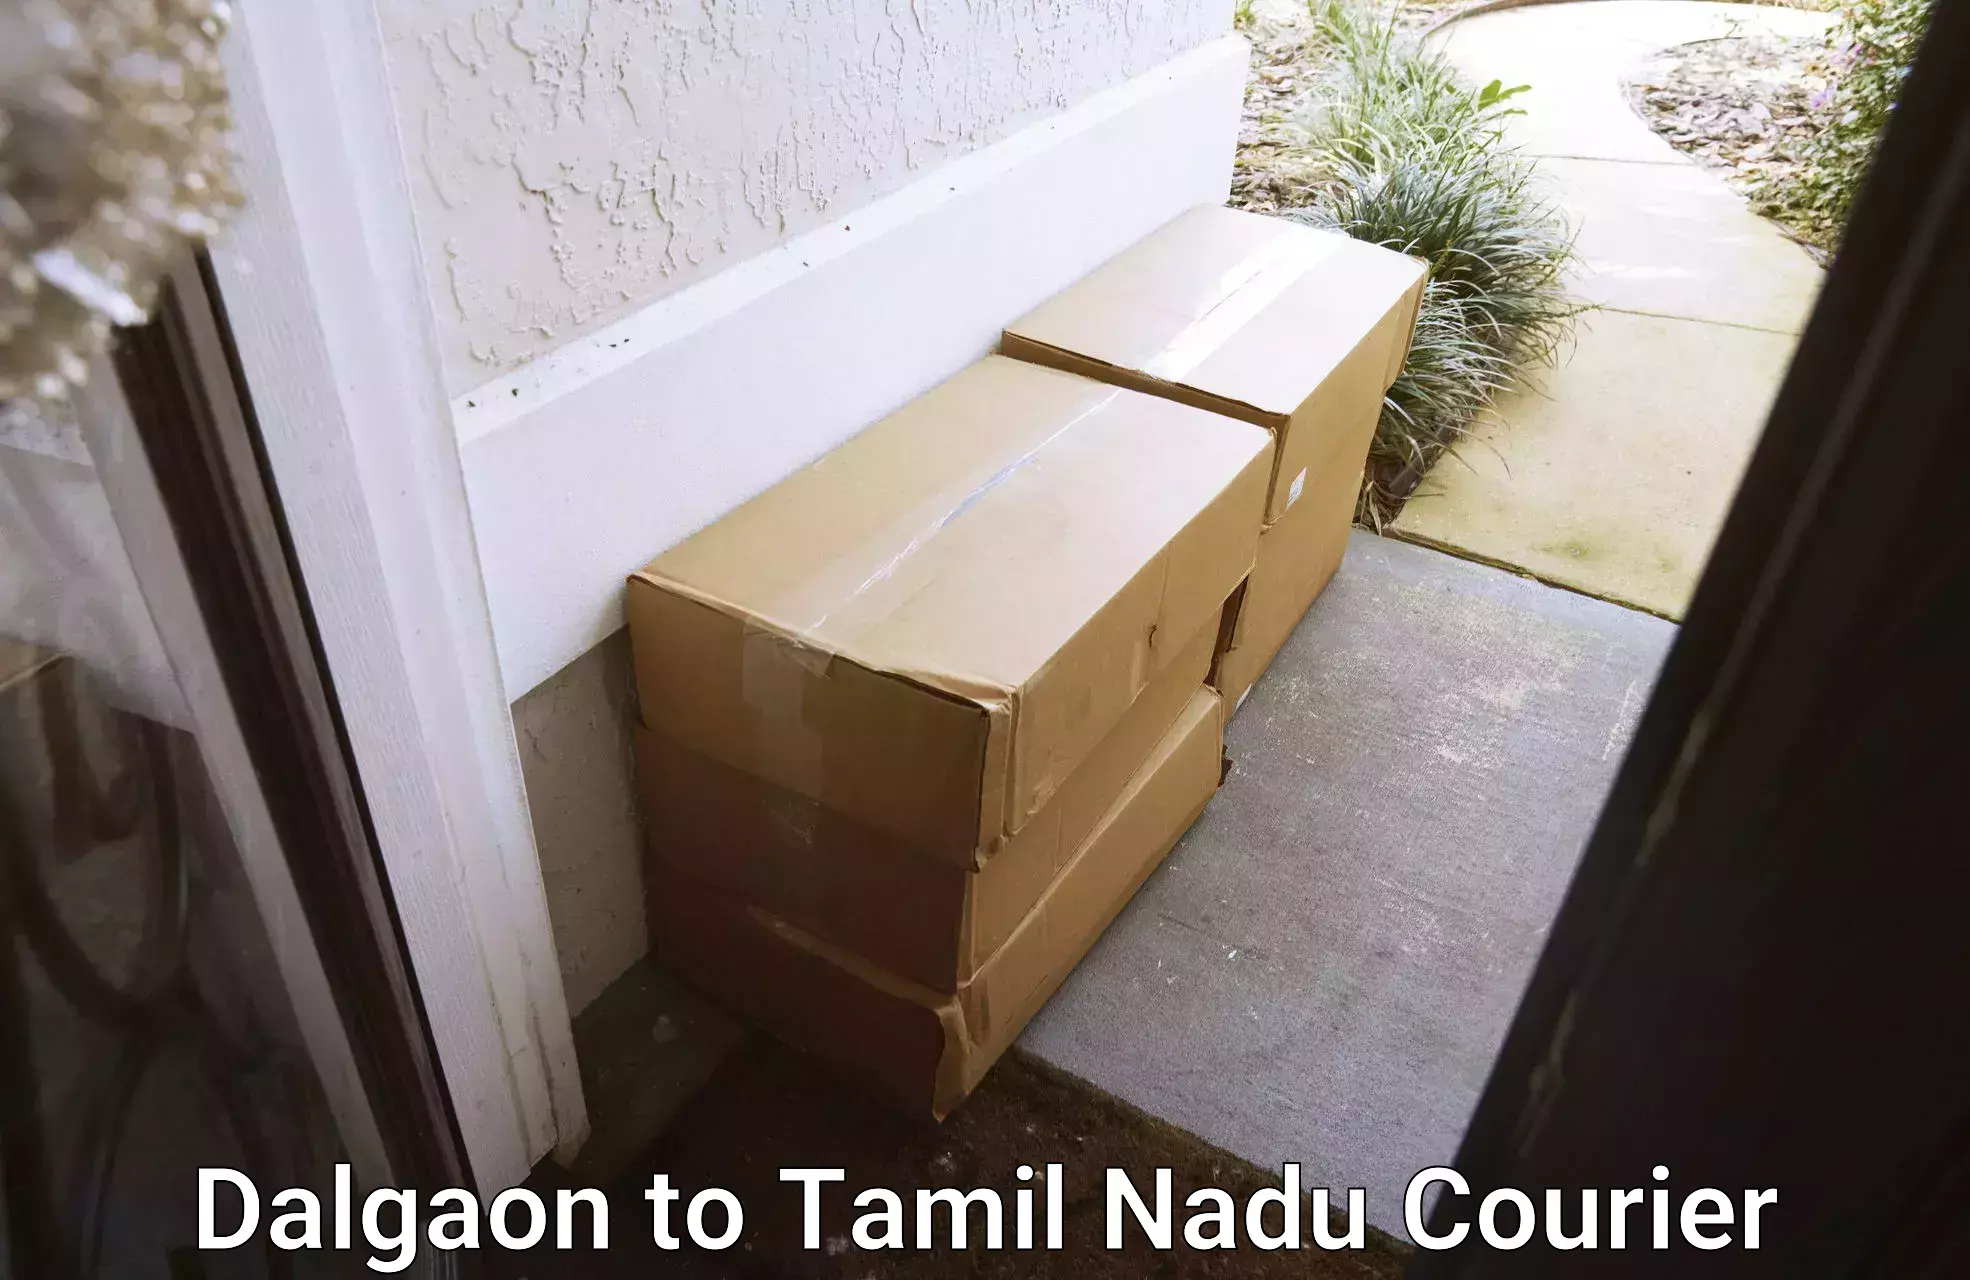 Same-day delivery solutions in Dalgaon to Anna University Chennai